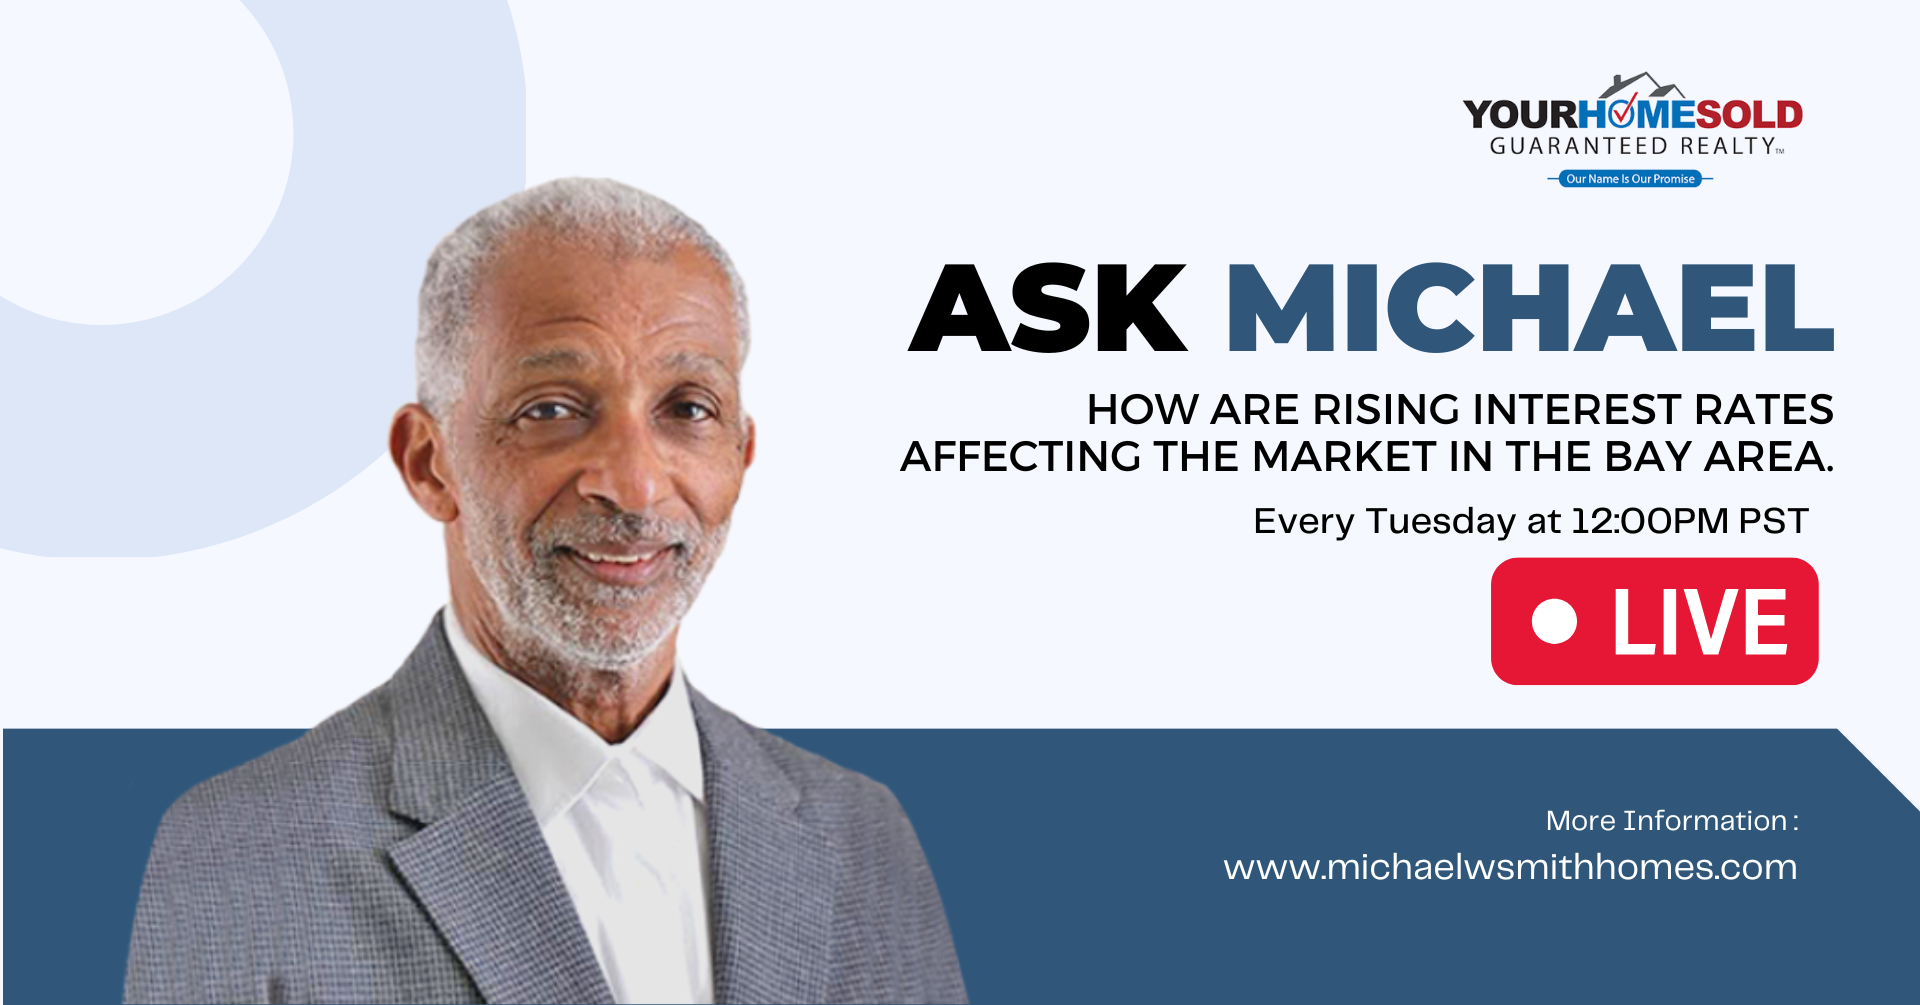 #ASKMICHAEL - EP 1: How are rising interest rates affecting the market in the Bay Area.